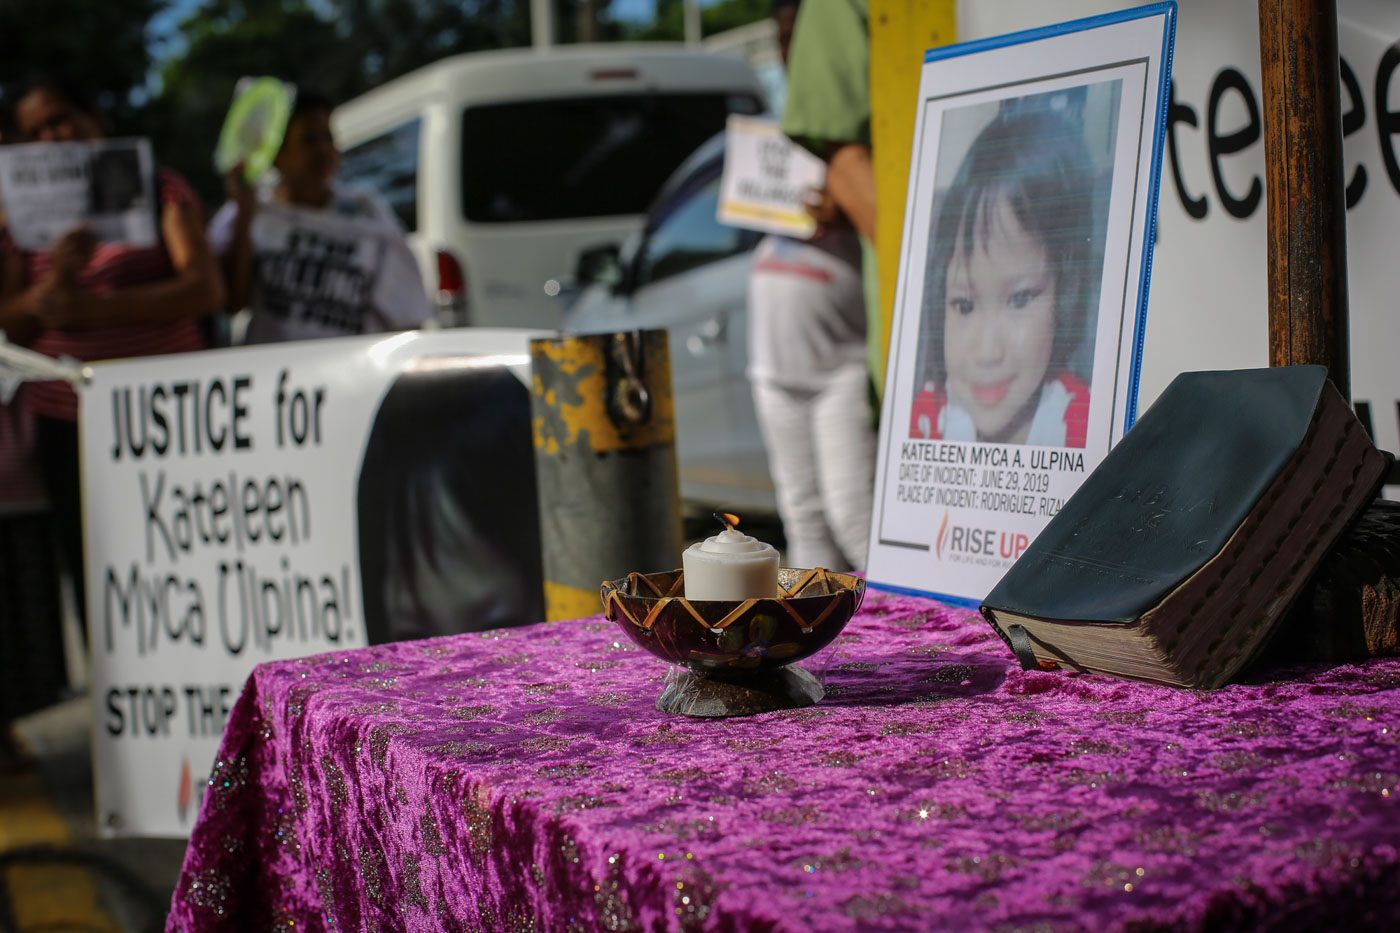 DEFENSELESS. Myca Ulpina's mother claims she was killed defenseless. Photo by Jire Carreon/Rappler 